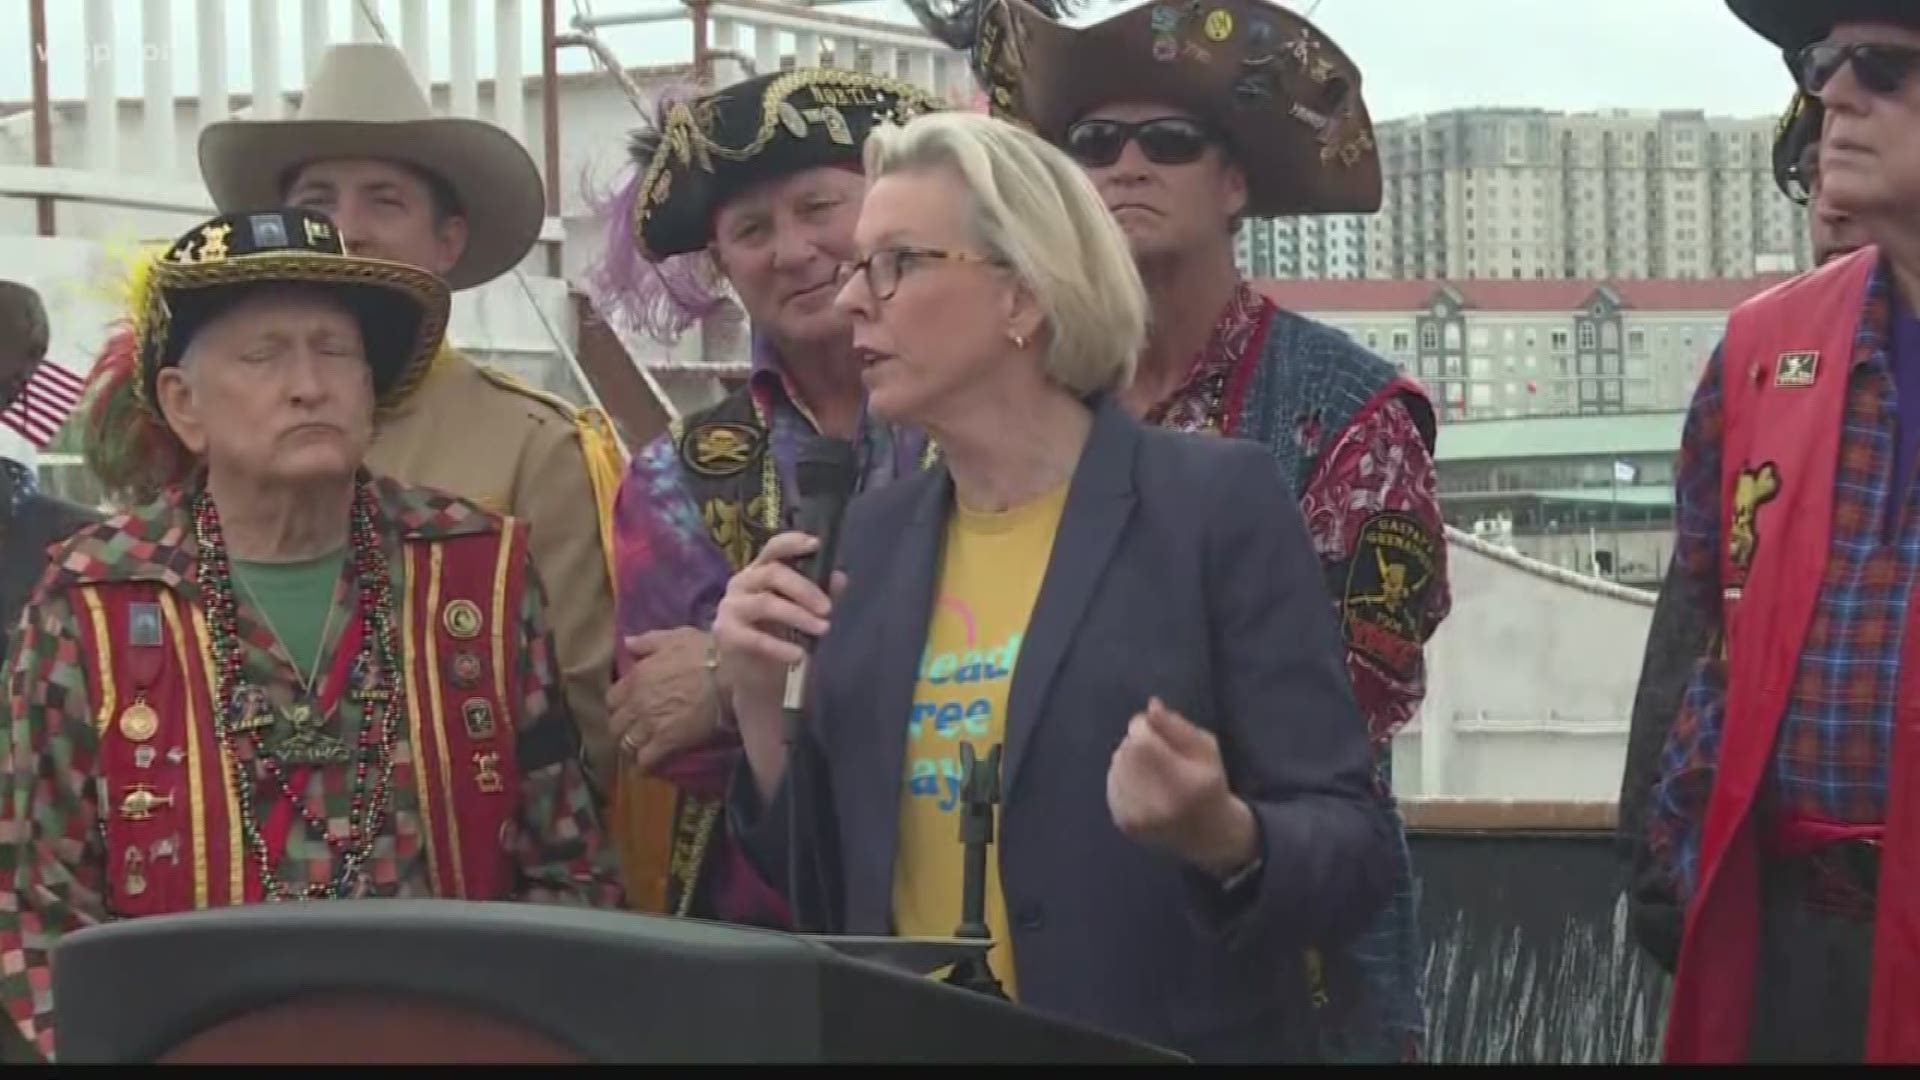 Mayor Jane Castor is working to ensure fewer people throw their beads into the water.